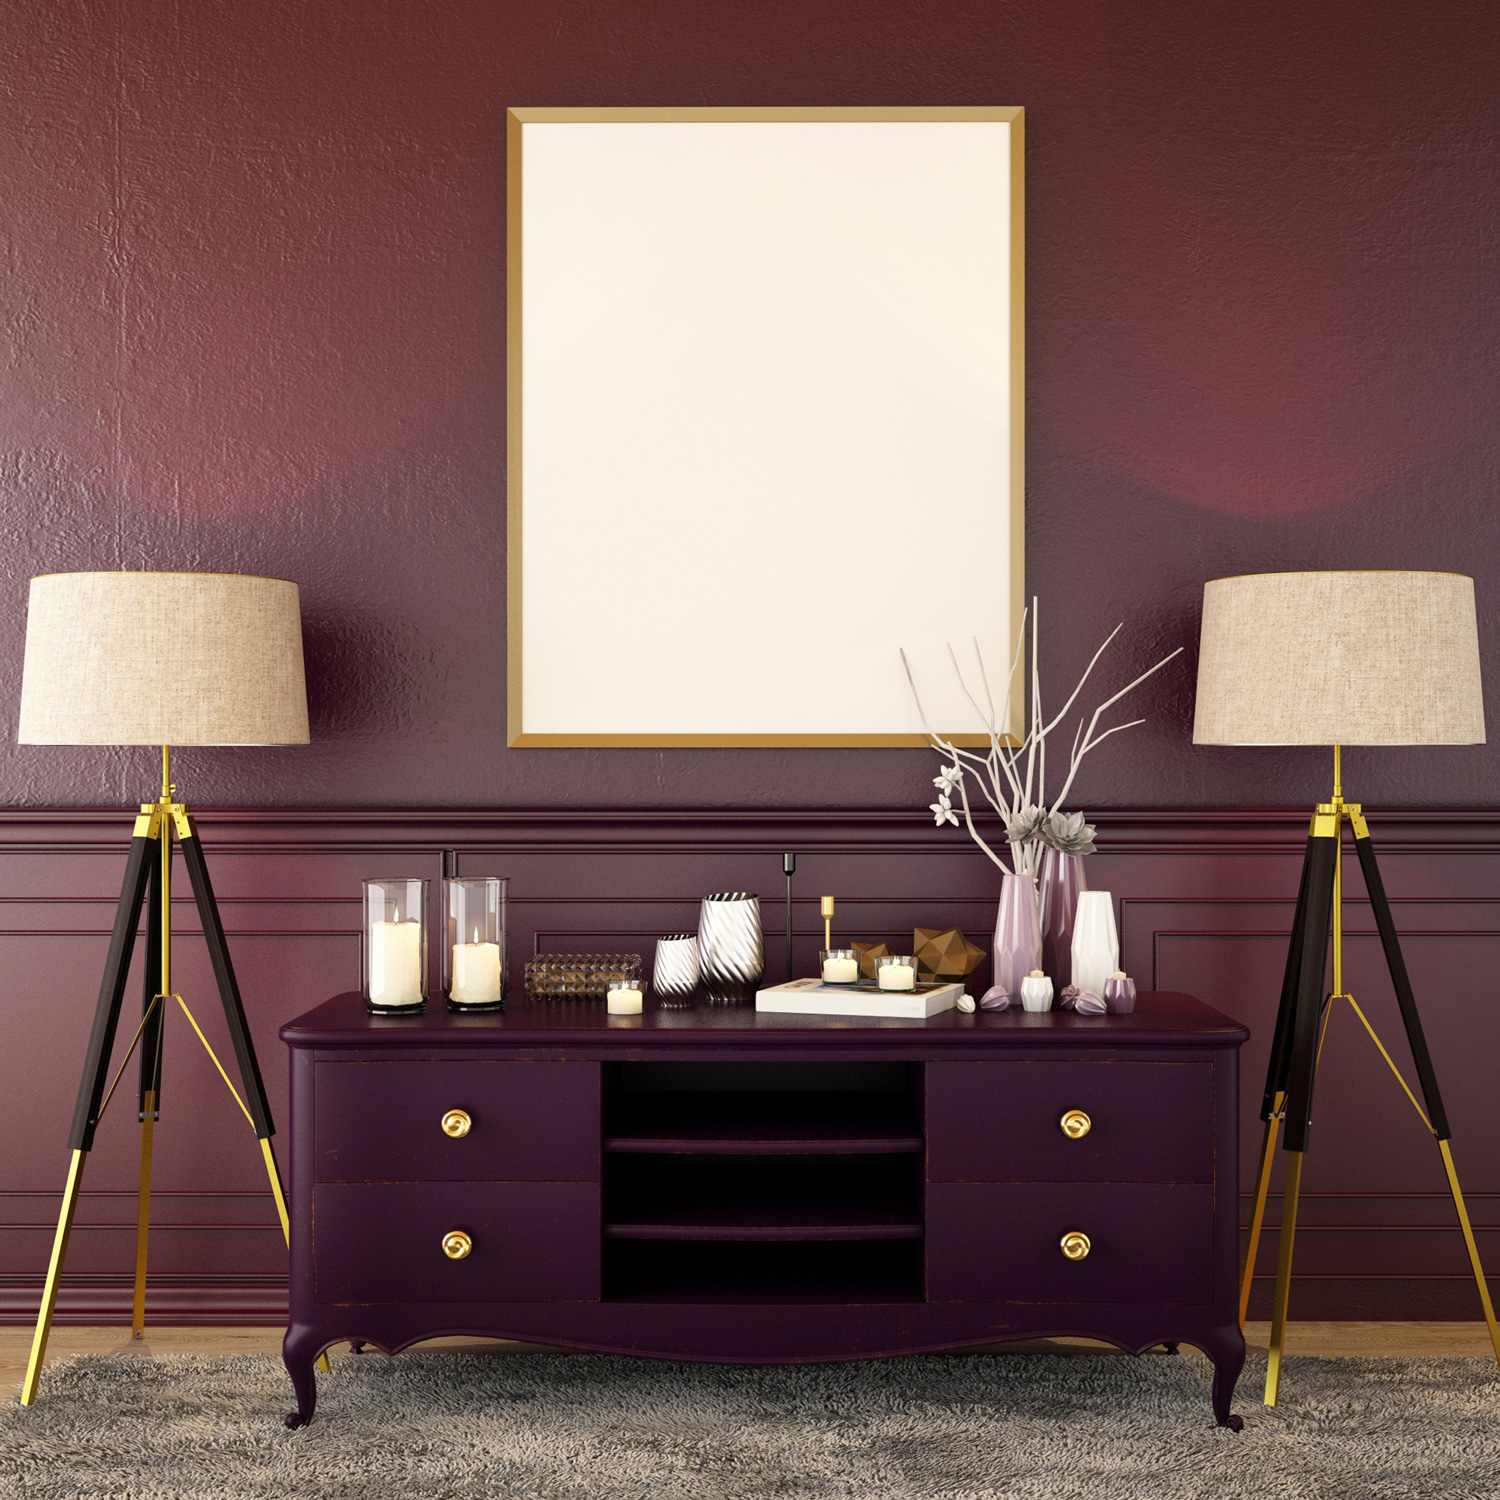 living interior design in classic style with decoration set on sideboard, velvet armchair on wooden floor and violet wall.